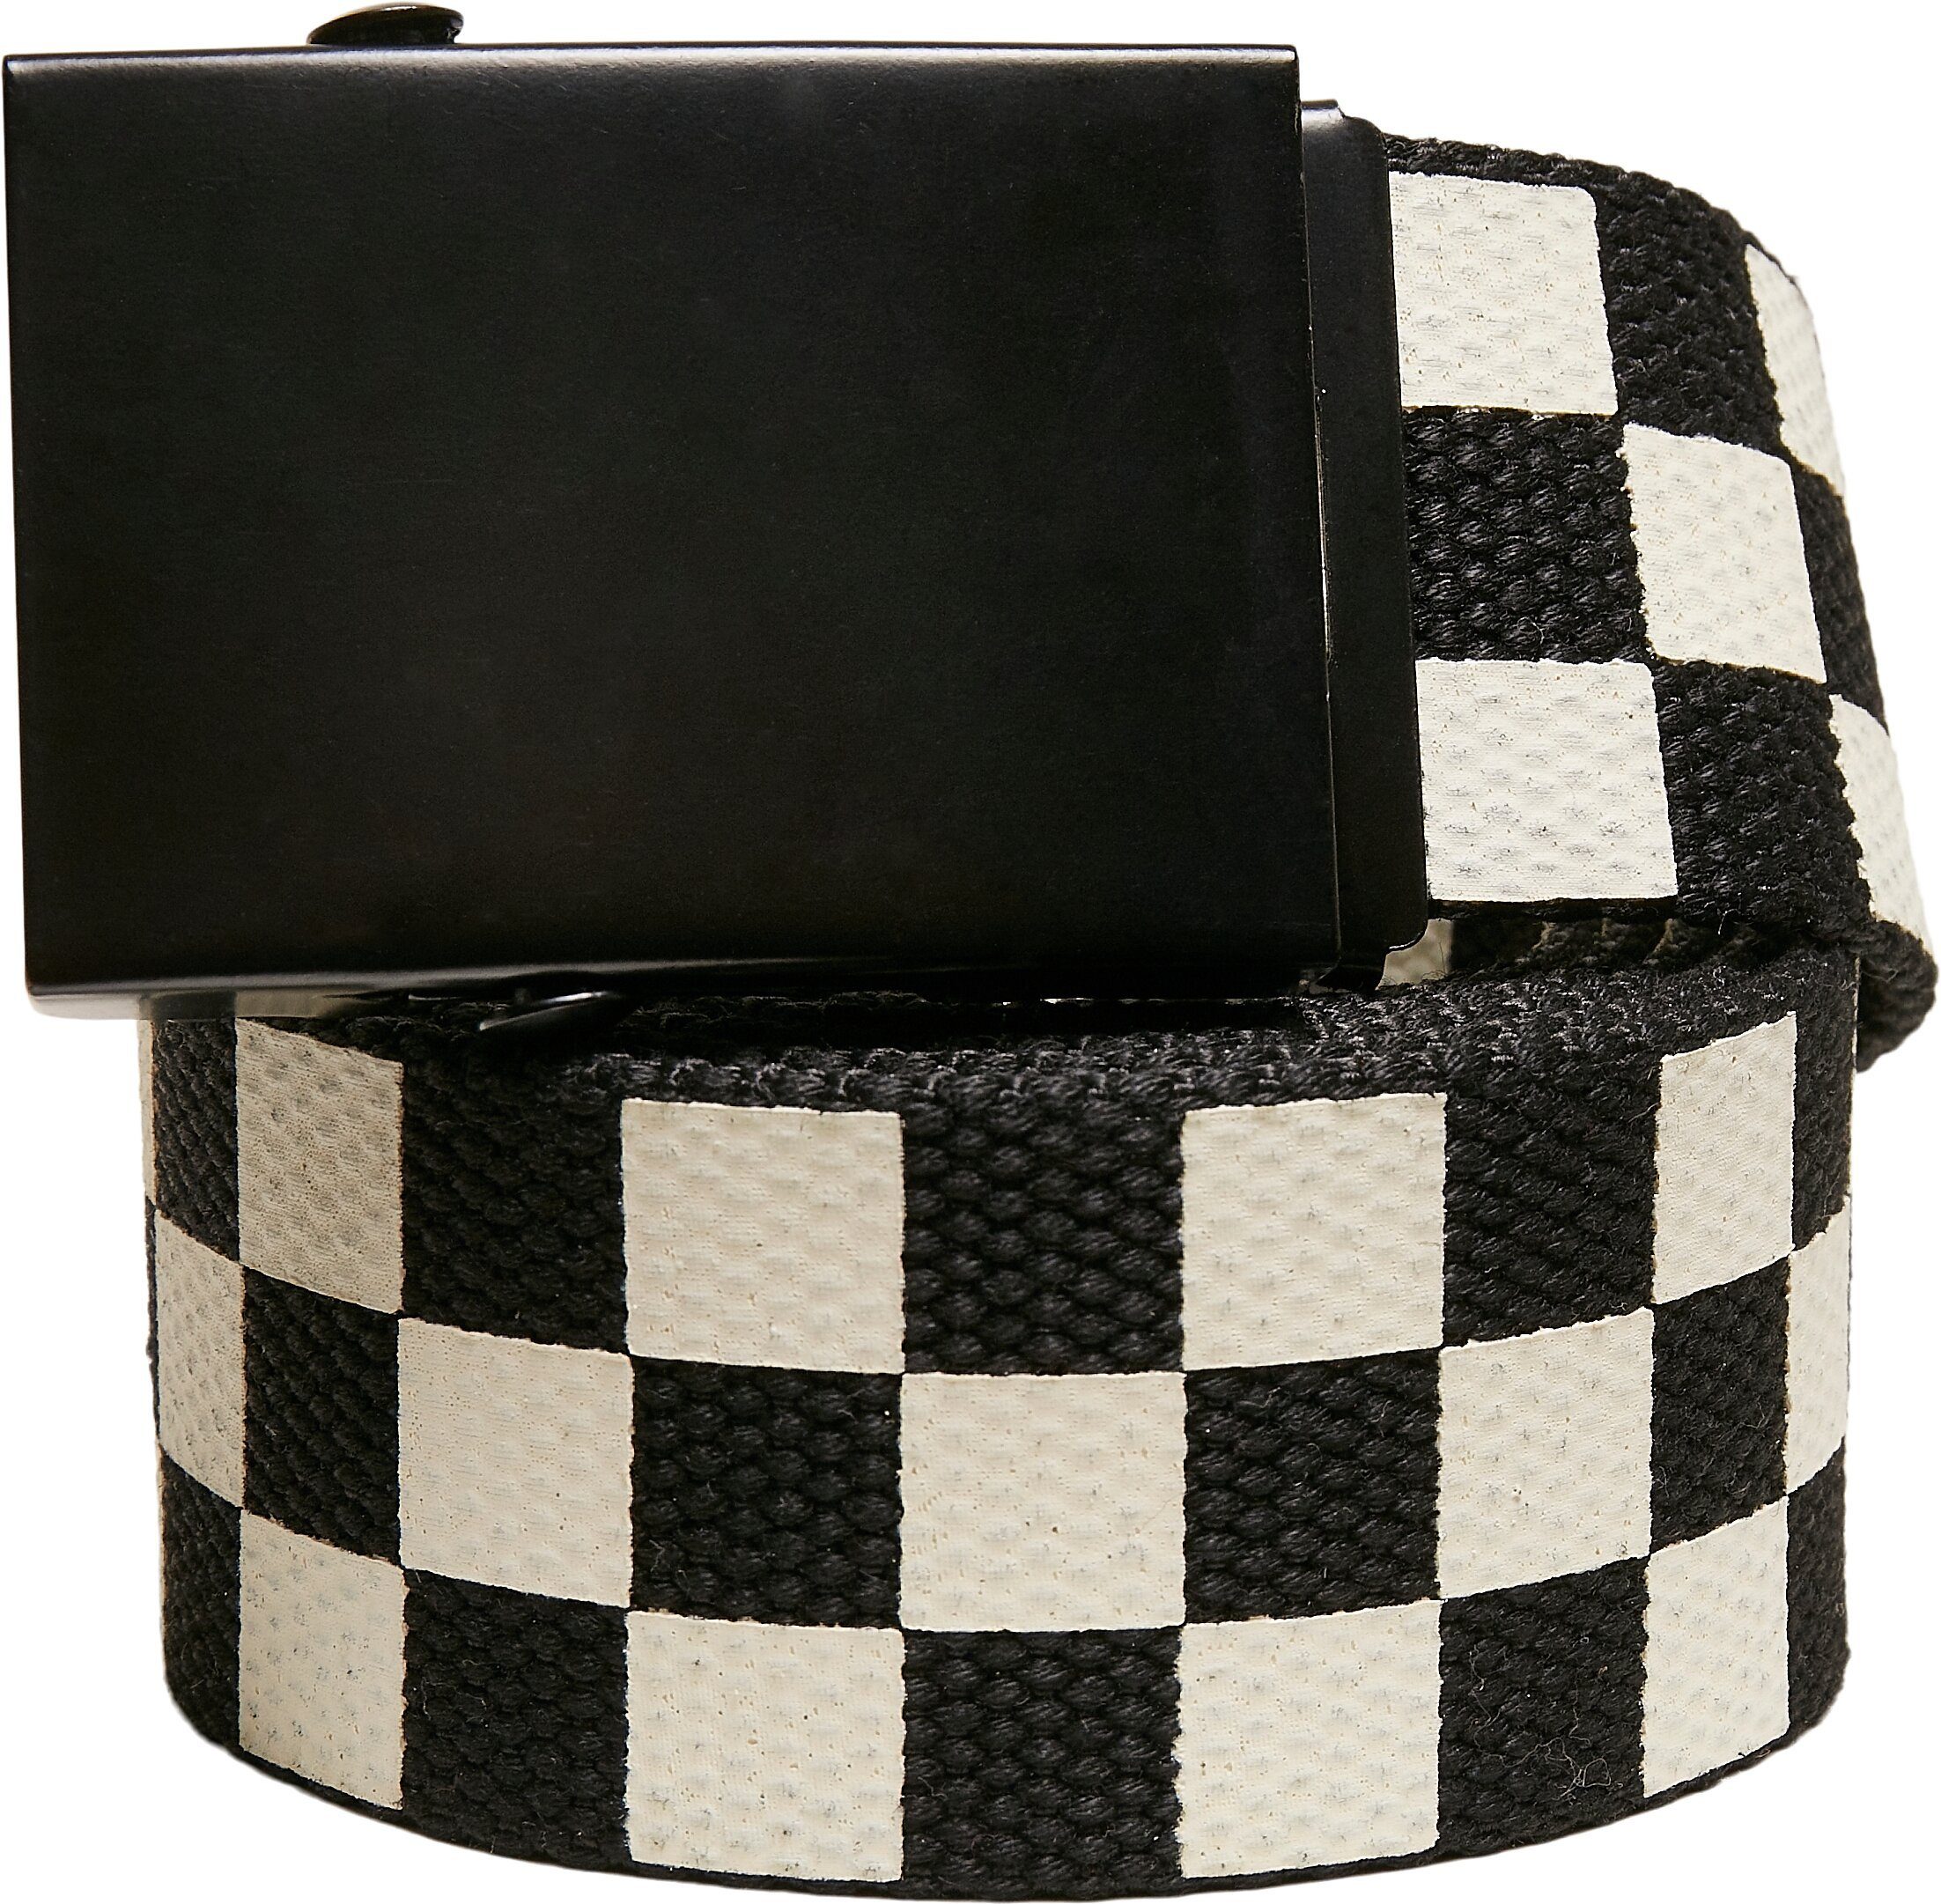 And 2-Pack Accessoires Belt Solid URBAN Check Hüftgürtel black-offwhite CLASSICS Canvas